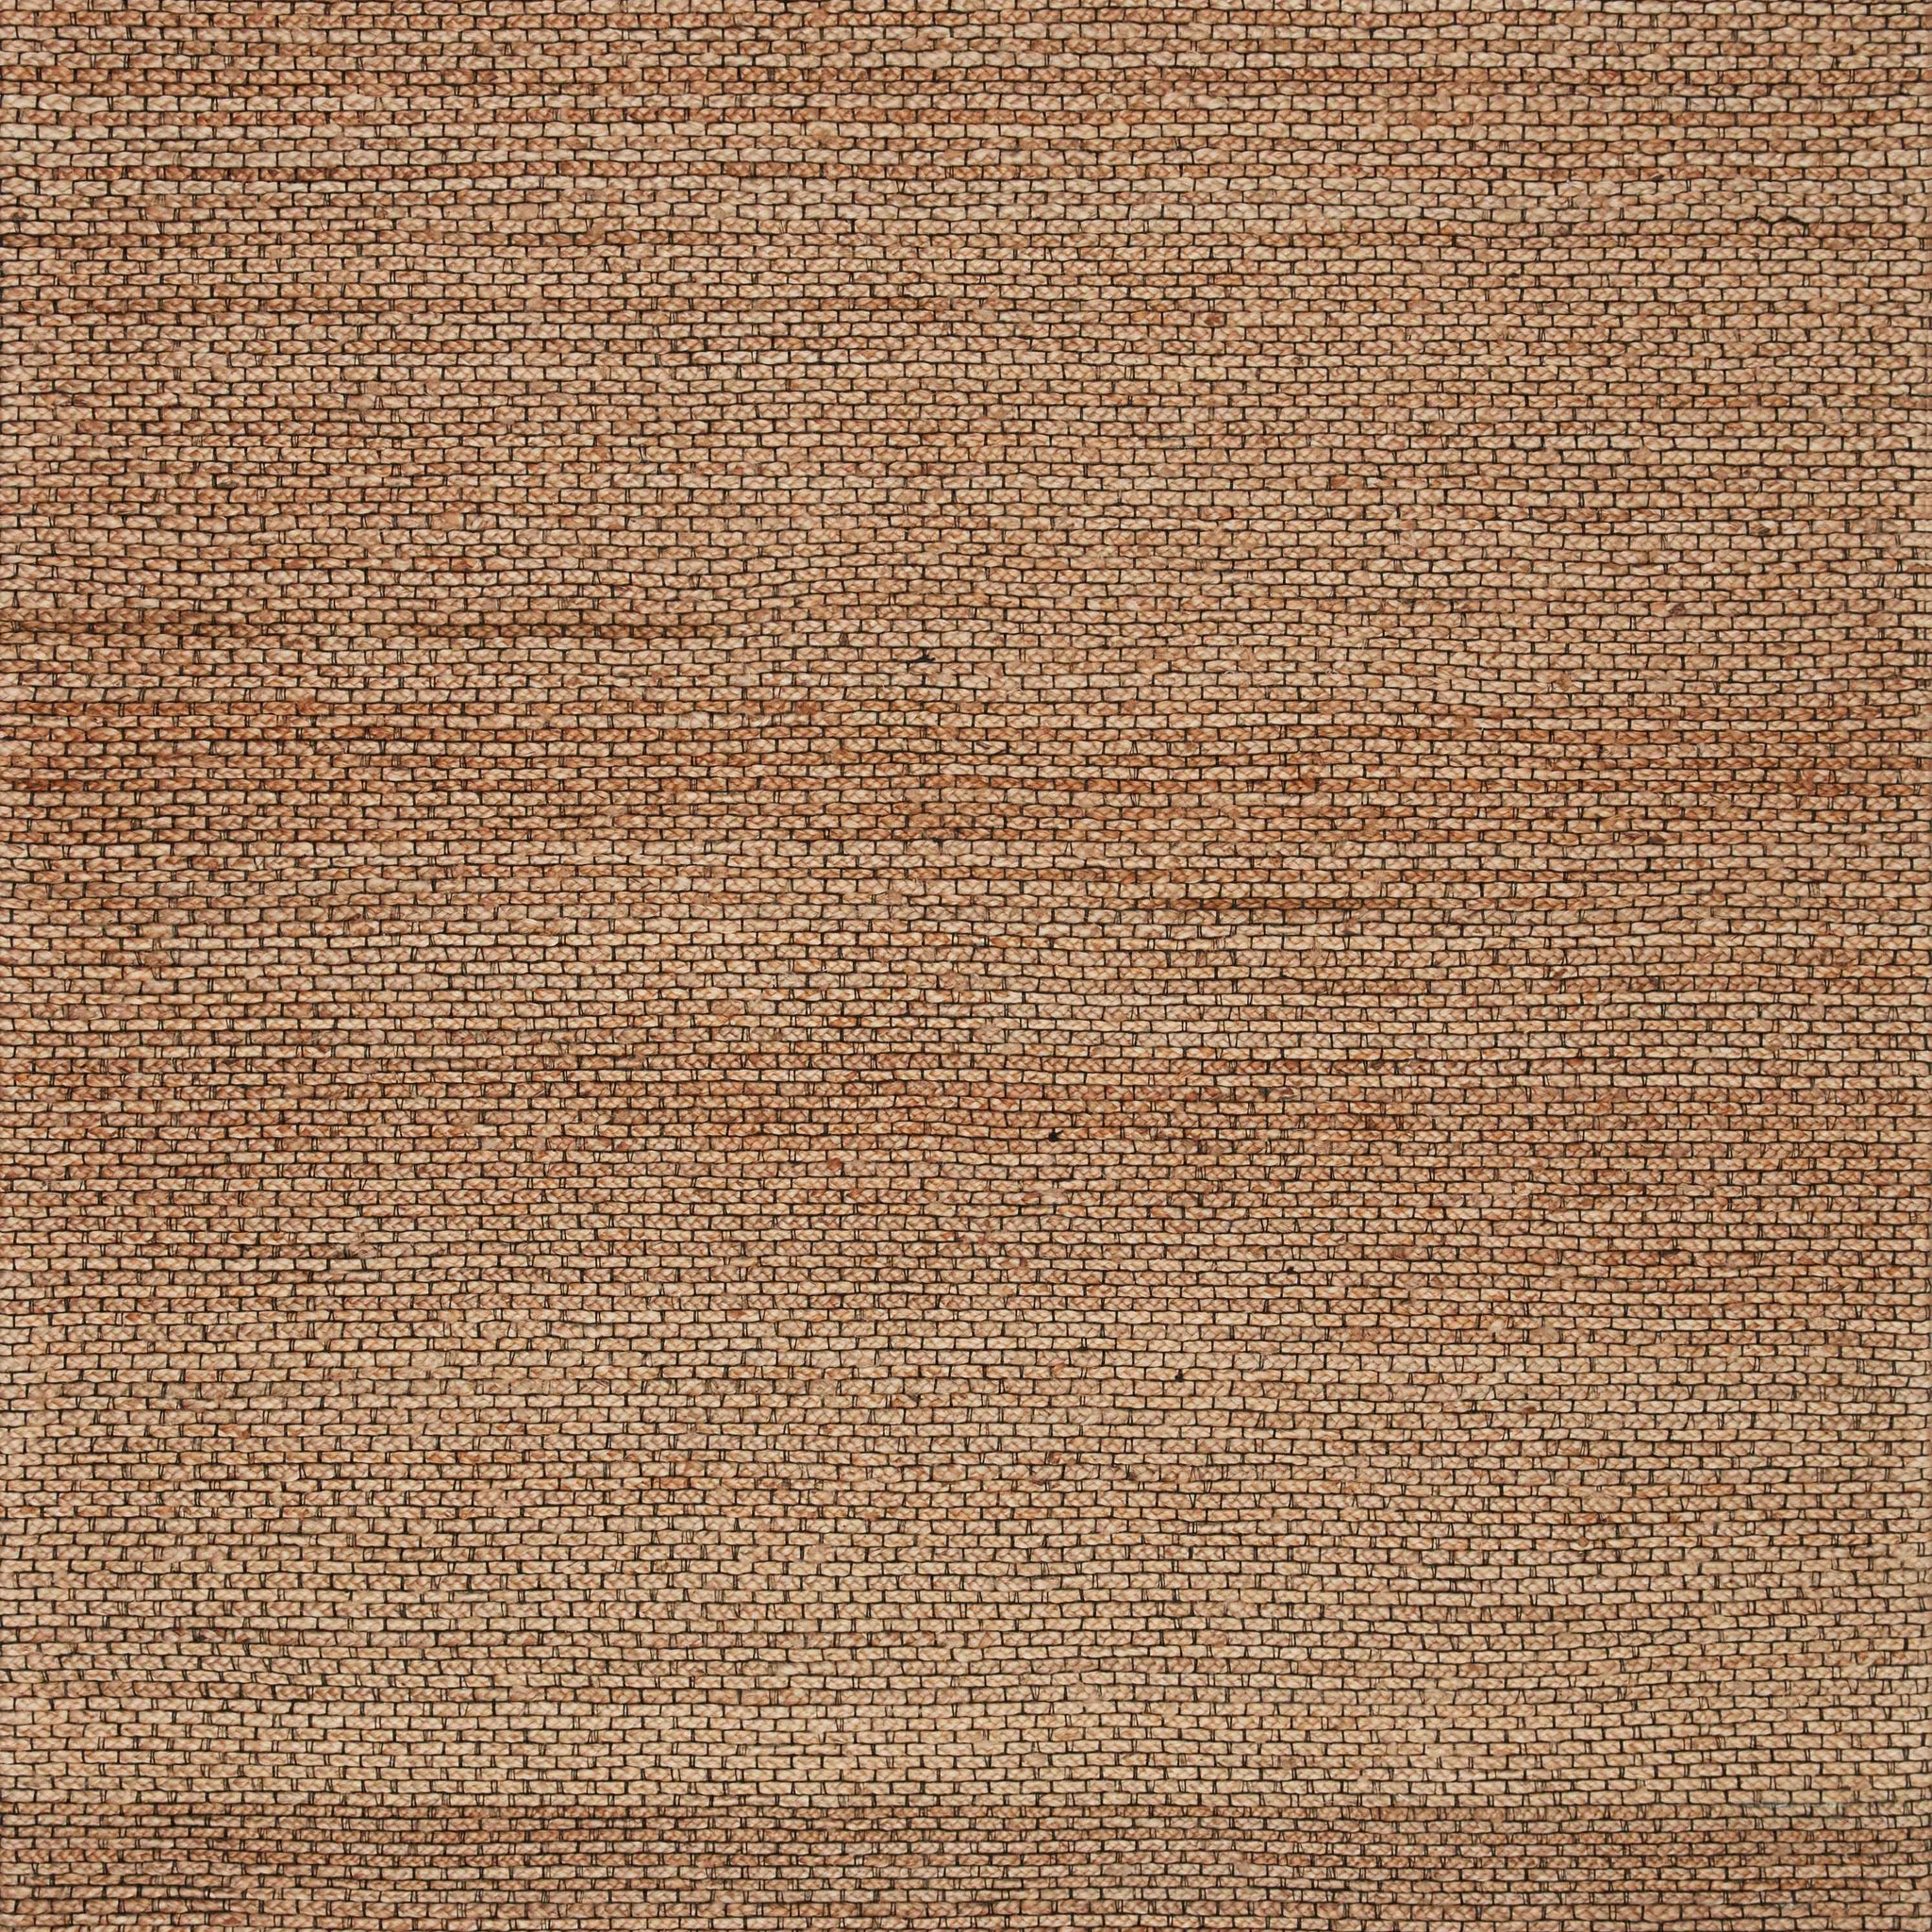 Loloi Lily Natural 9'-3" x 13' Area Rug